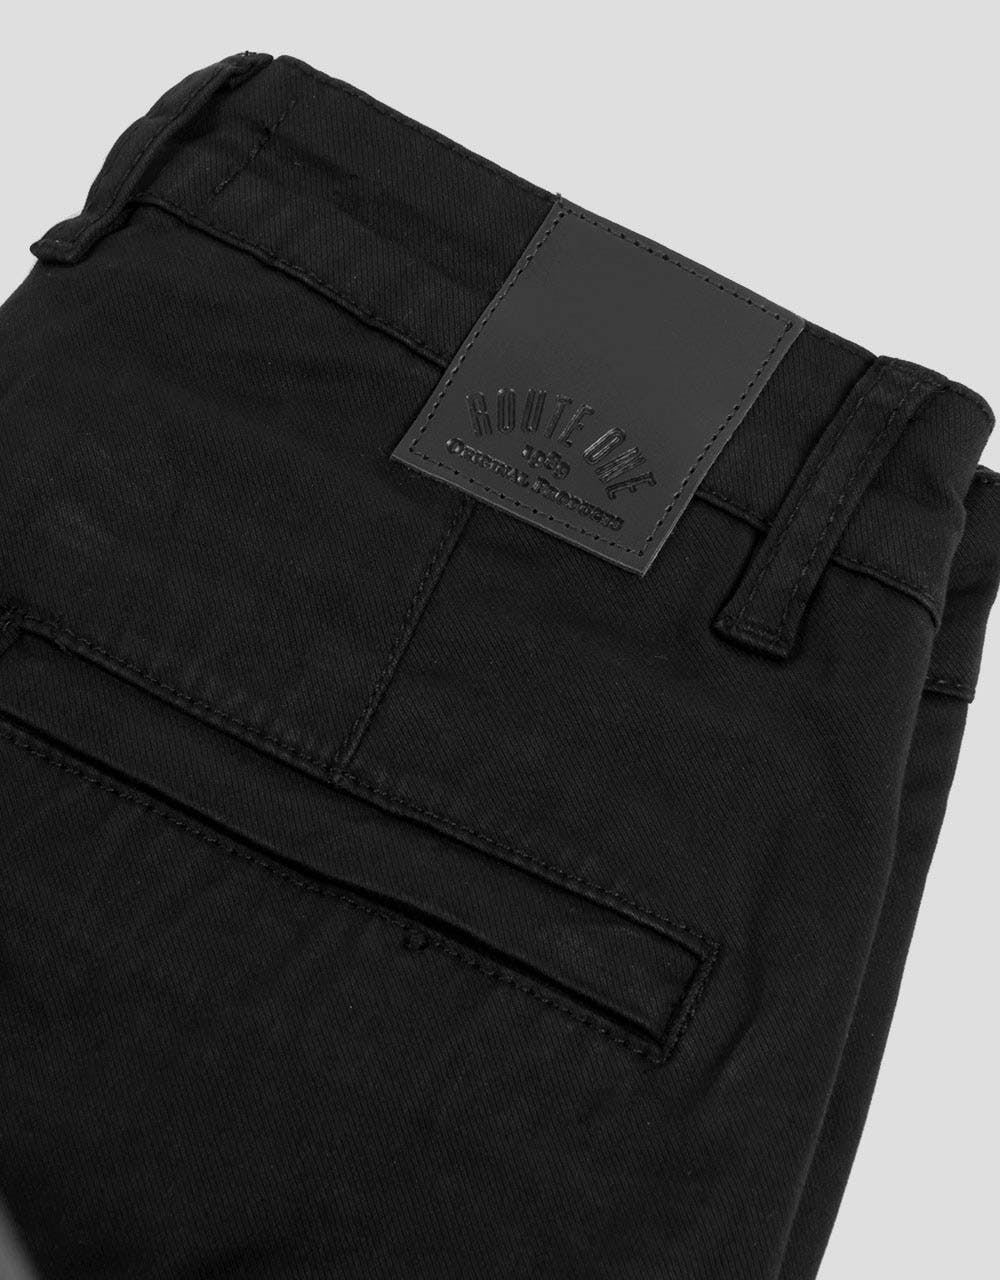 Route One Slim Fit Kids Chinos - Black